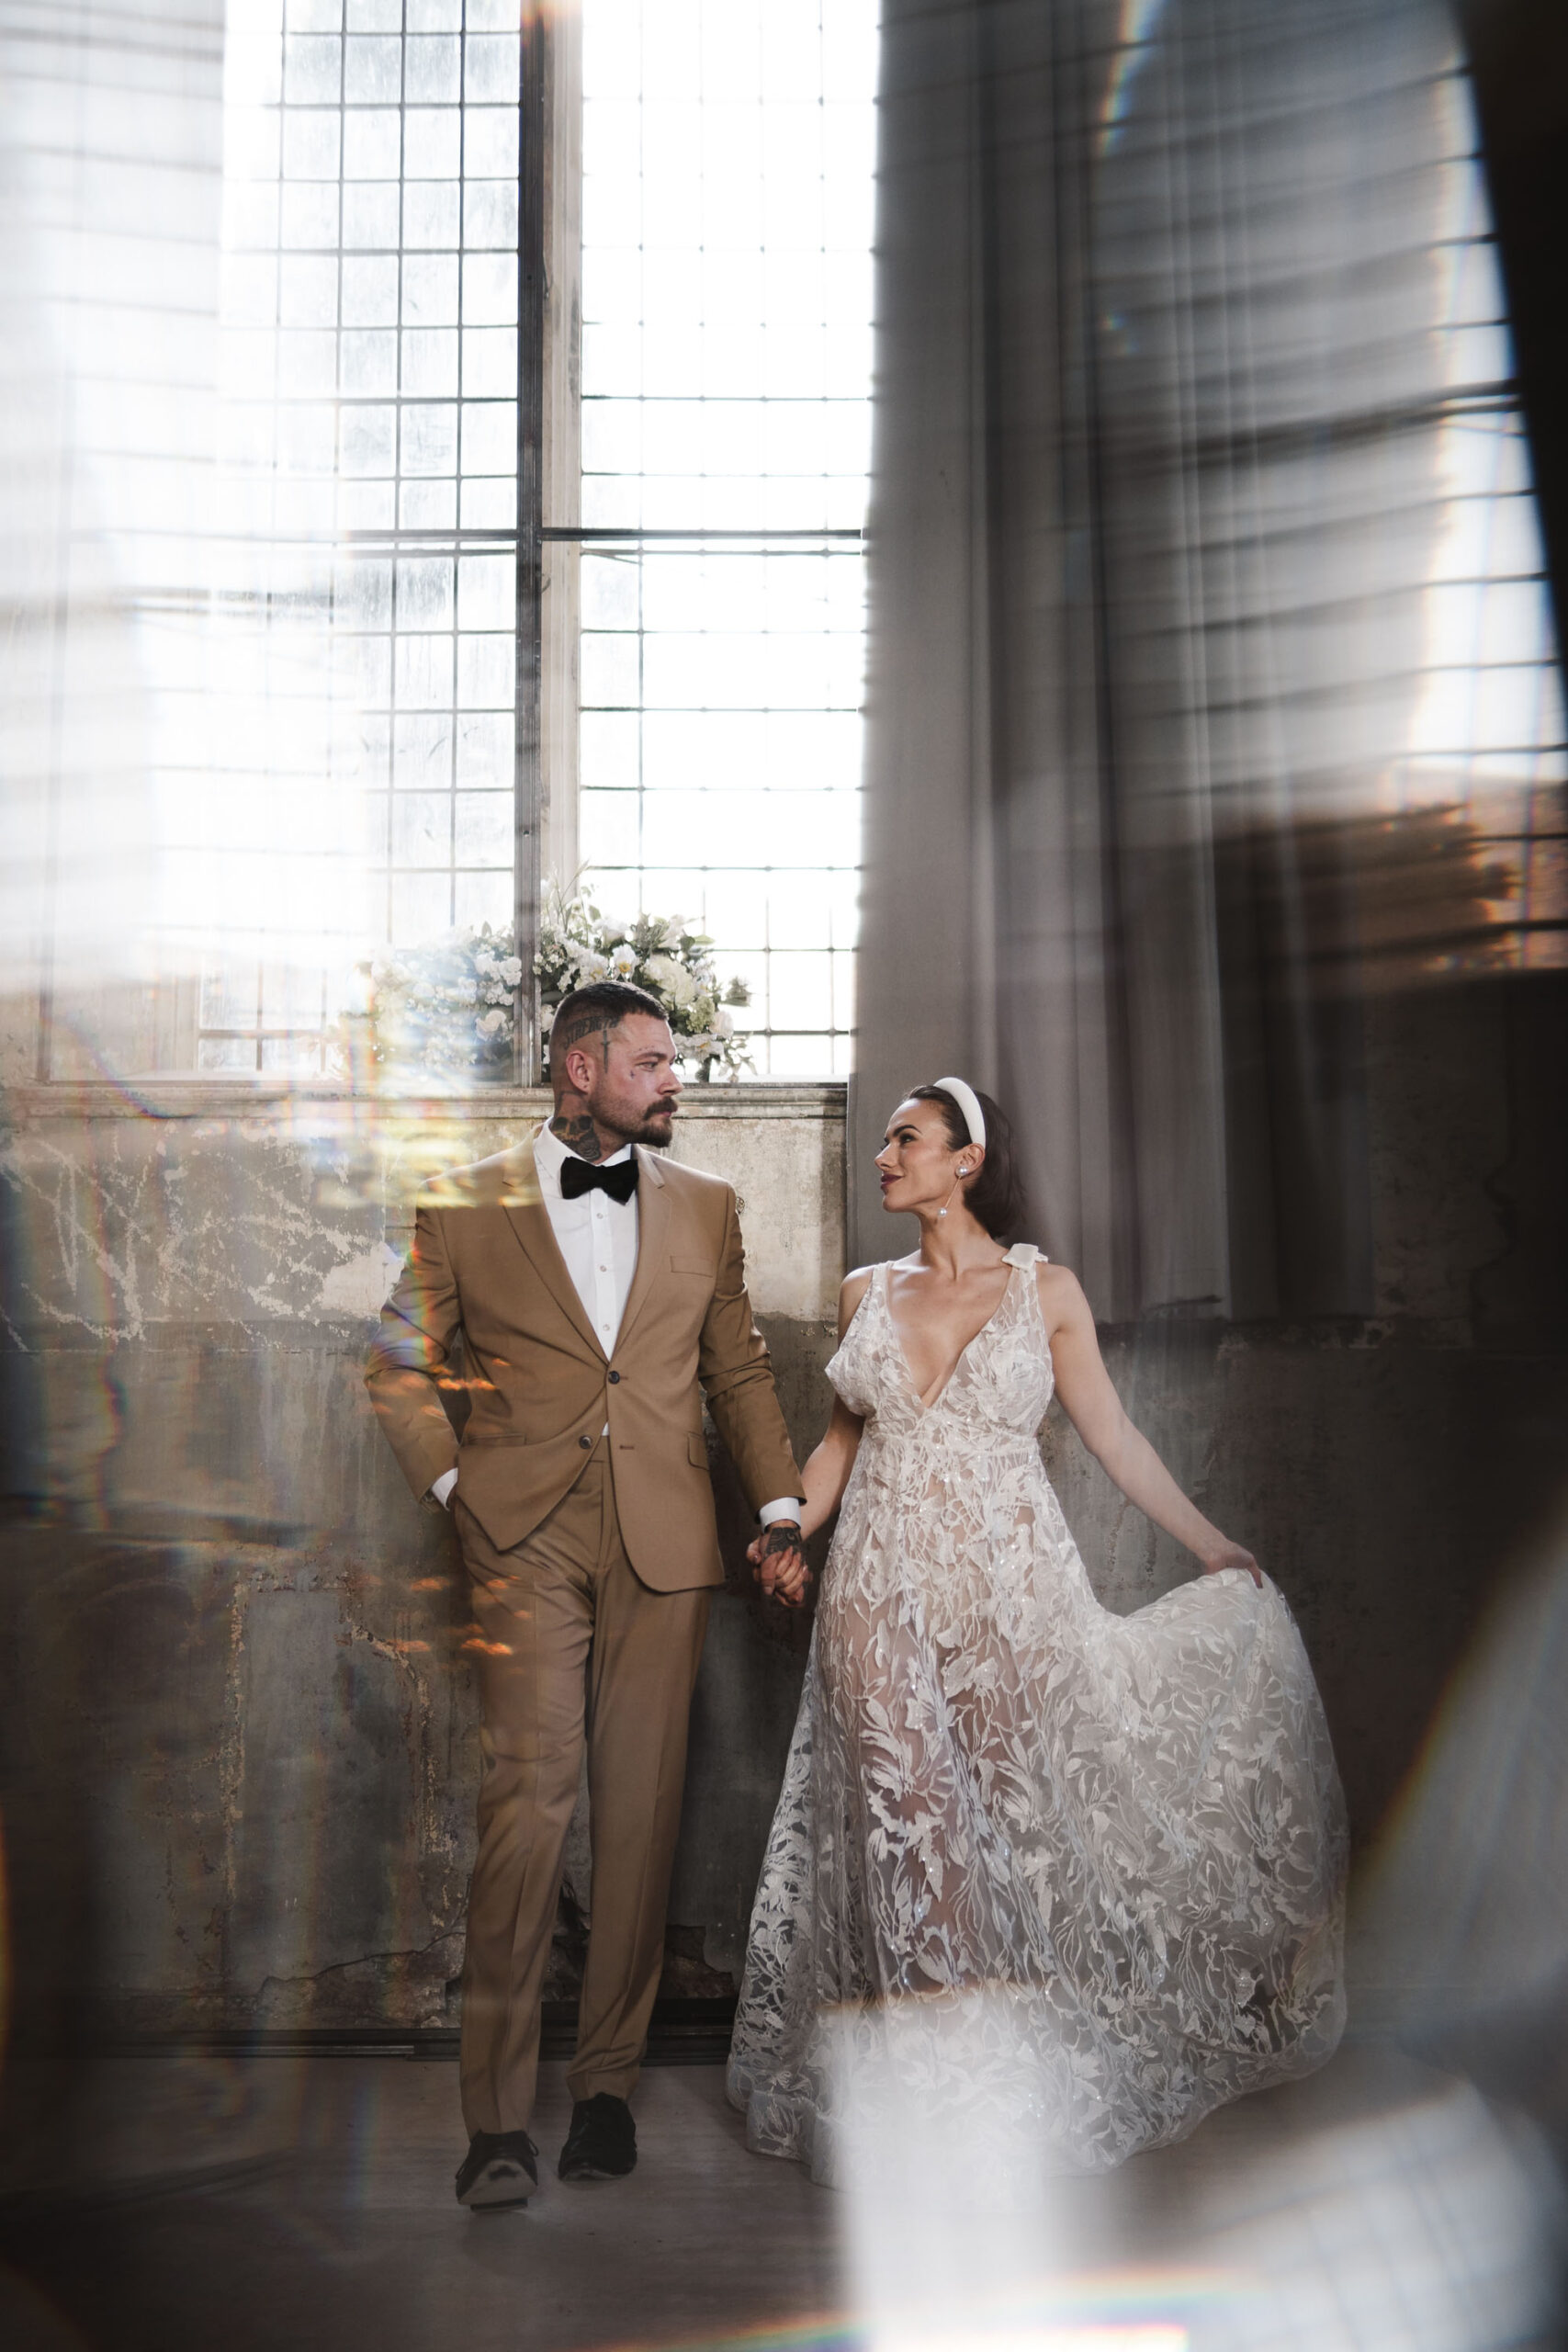 Wedding portrait from By Karolina. A bride and groom stand before a window. He's wearing a tan suit and black bowtie. She's in a patterned white dress which she's holding out to the side.